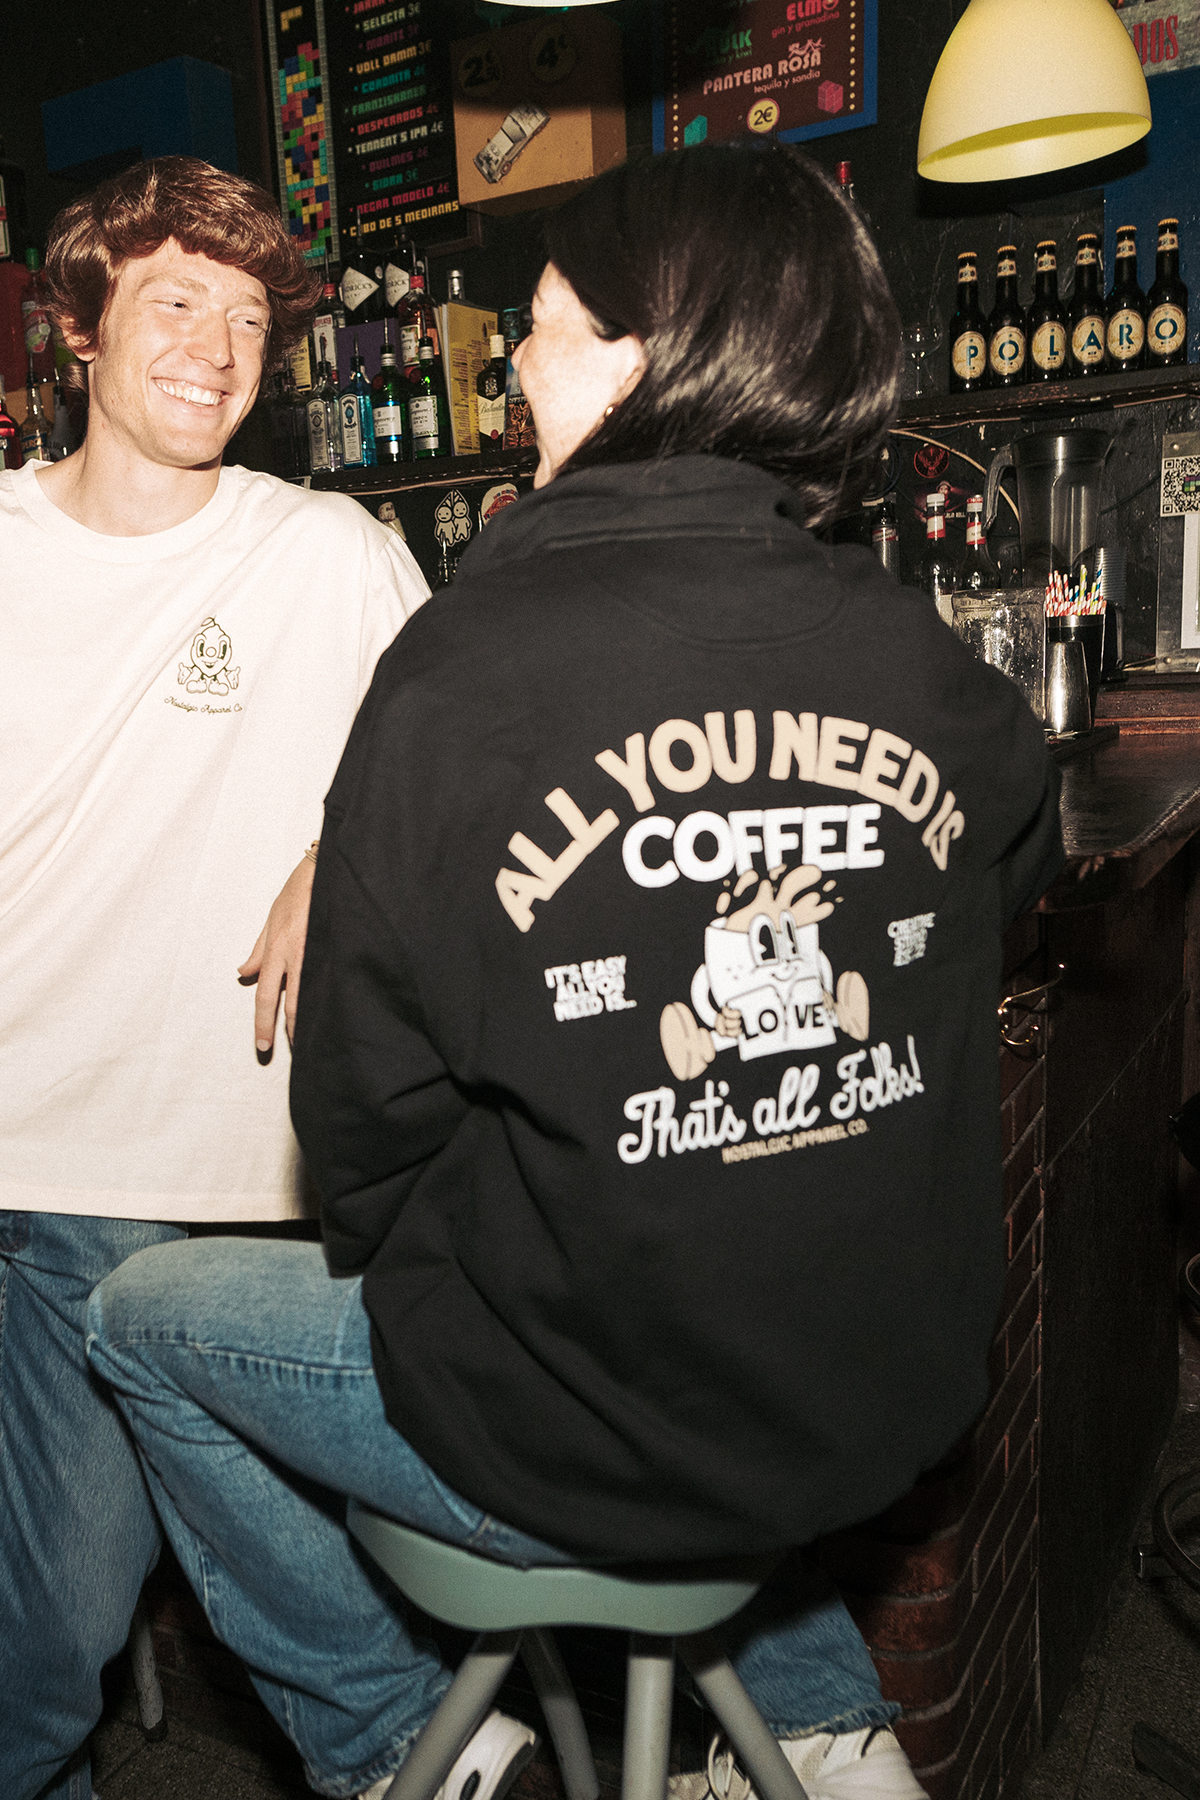 All You Need is Coffee | Sudadera Oversize